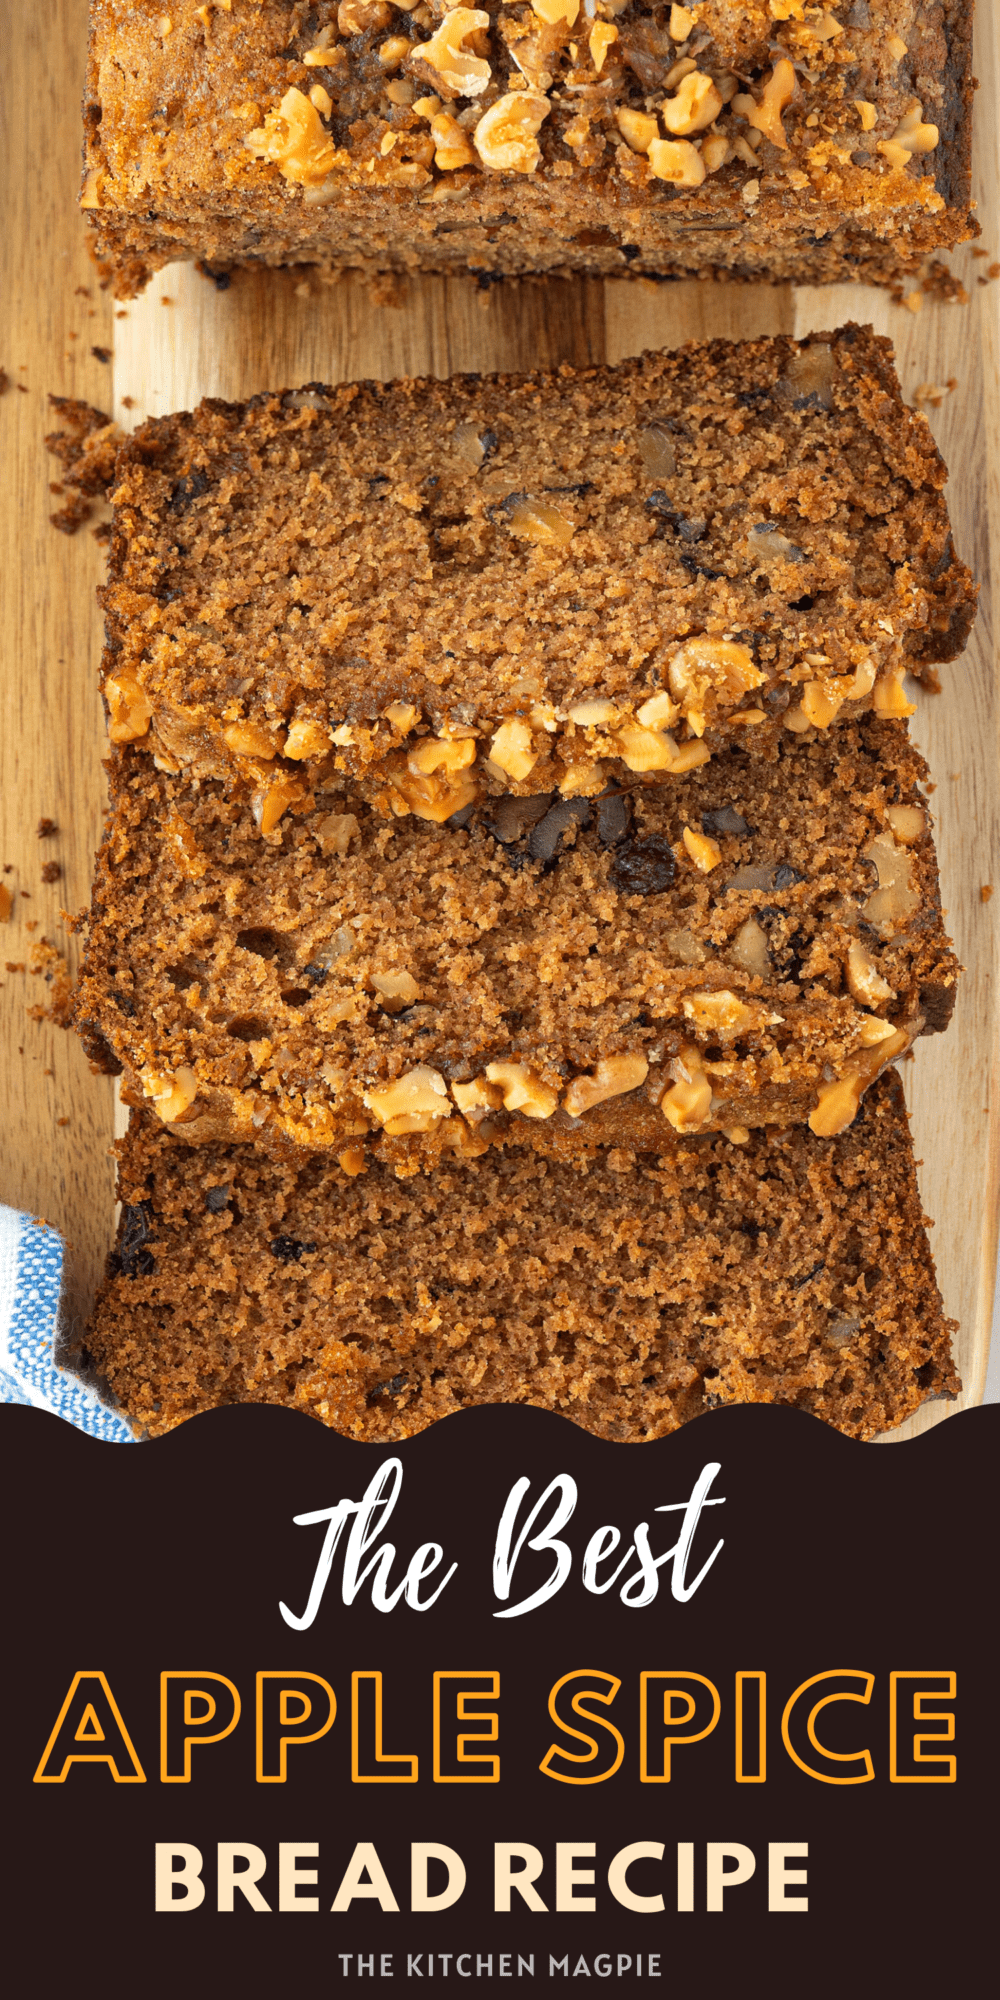 This hearty, sweet and spiced applesauce bread is loaded with raisins and nuts and is the perfect breakfast or sweet snack with a cup of coffee or tea.